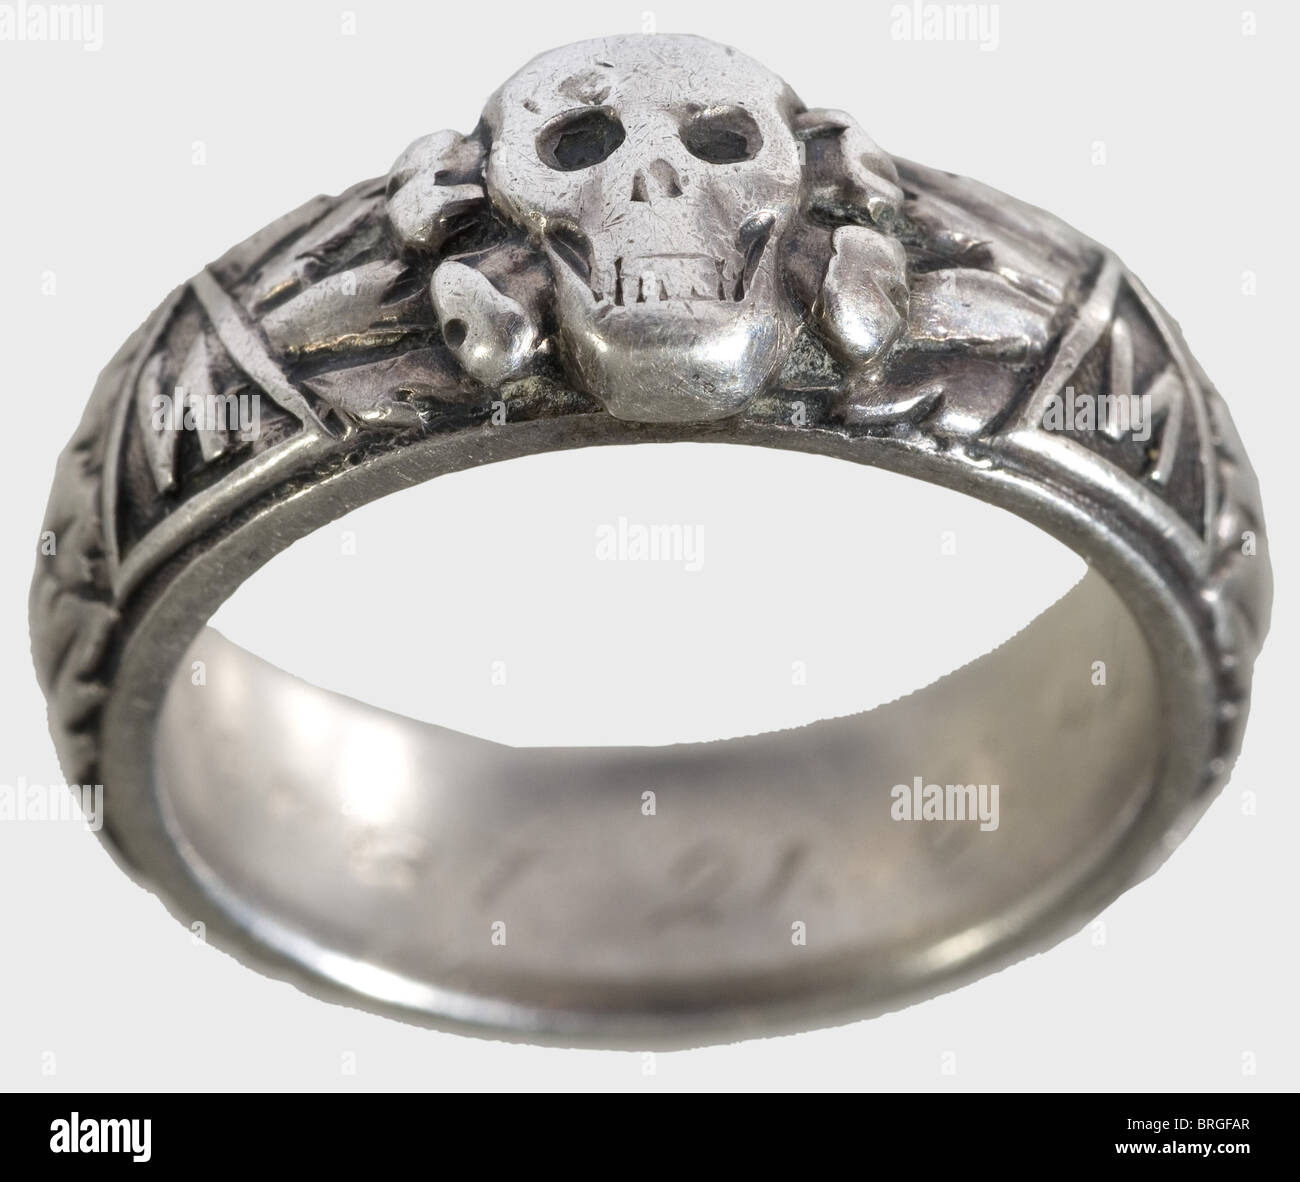 A SS death's-head ring,and a heraldic ring of the Estonian Legion  Silver,custom-made issue of the jeweller Gahr in Munich with separately  soldered-on death's head. On the inside surface the engraved dedication:  "S.lb.